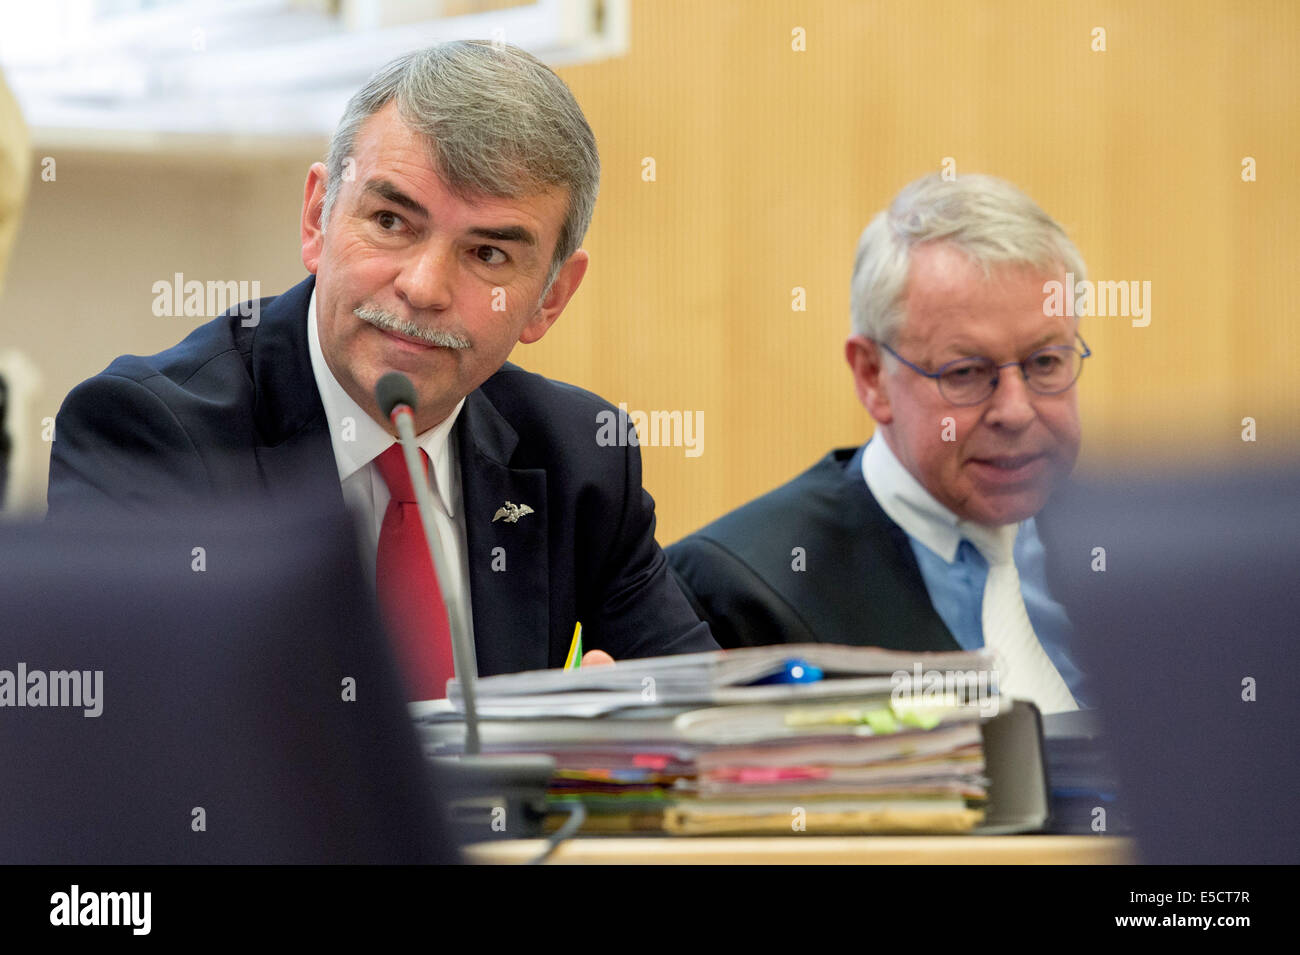 Gustl Mollath (L) sits next to his defender Gerhard Strate in the courtroom of the Land court in Regensburg, Germany, 28 July 2014. The assigned counsels of Mollath request the dispensation of their brief. Photo: Armin Weigel/dpa Stock Photo